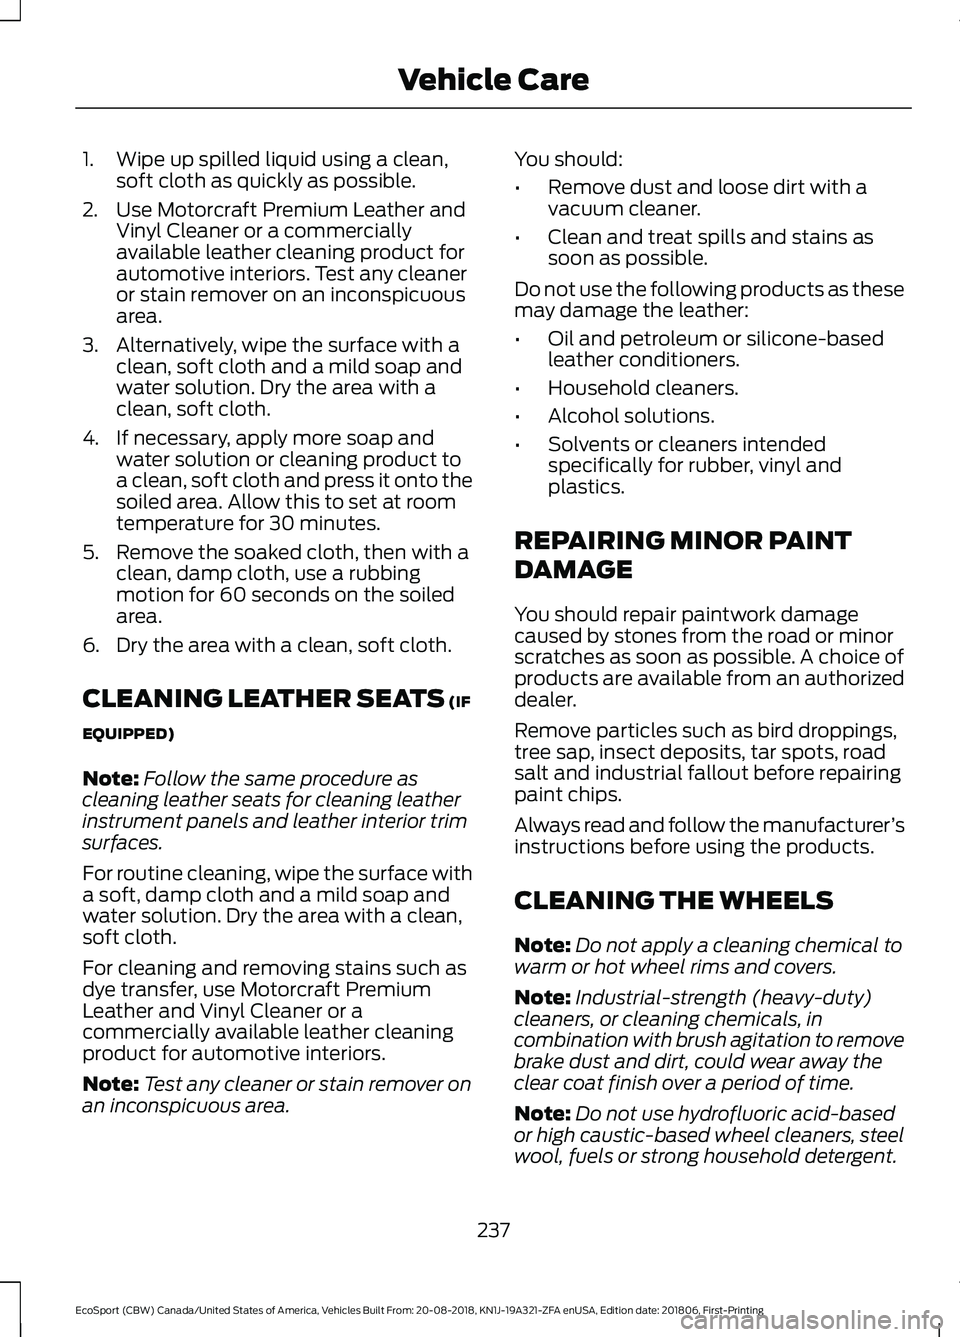 FORD ECOSPORT 2019 Owners Guide 1.Wipe up spilled liquid using a clean,soft cloth as quickly as possible.
2.Use Motorcraft Premium Leather andVinyl Cleaner or a commerciallyavailable leather cleaning product forautomotive interiors.